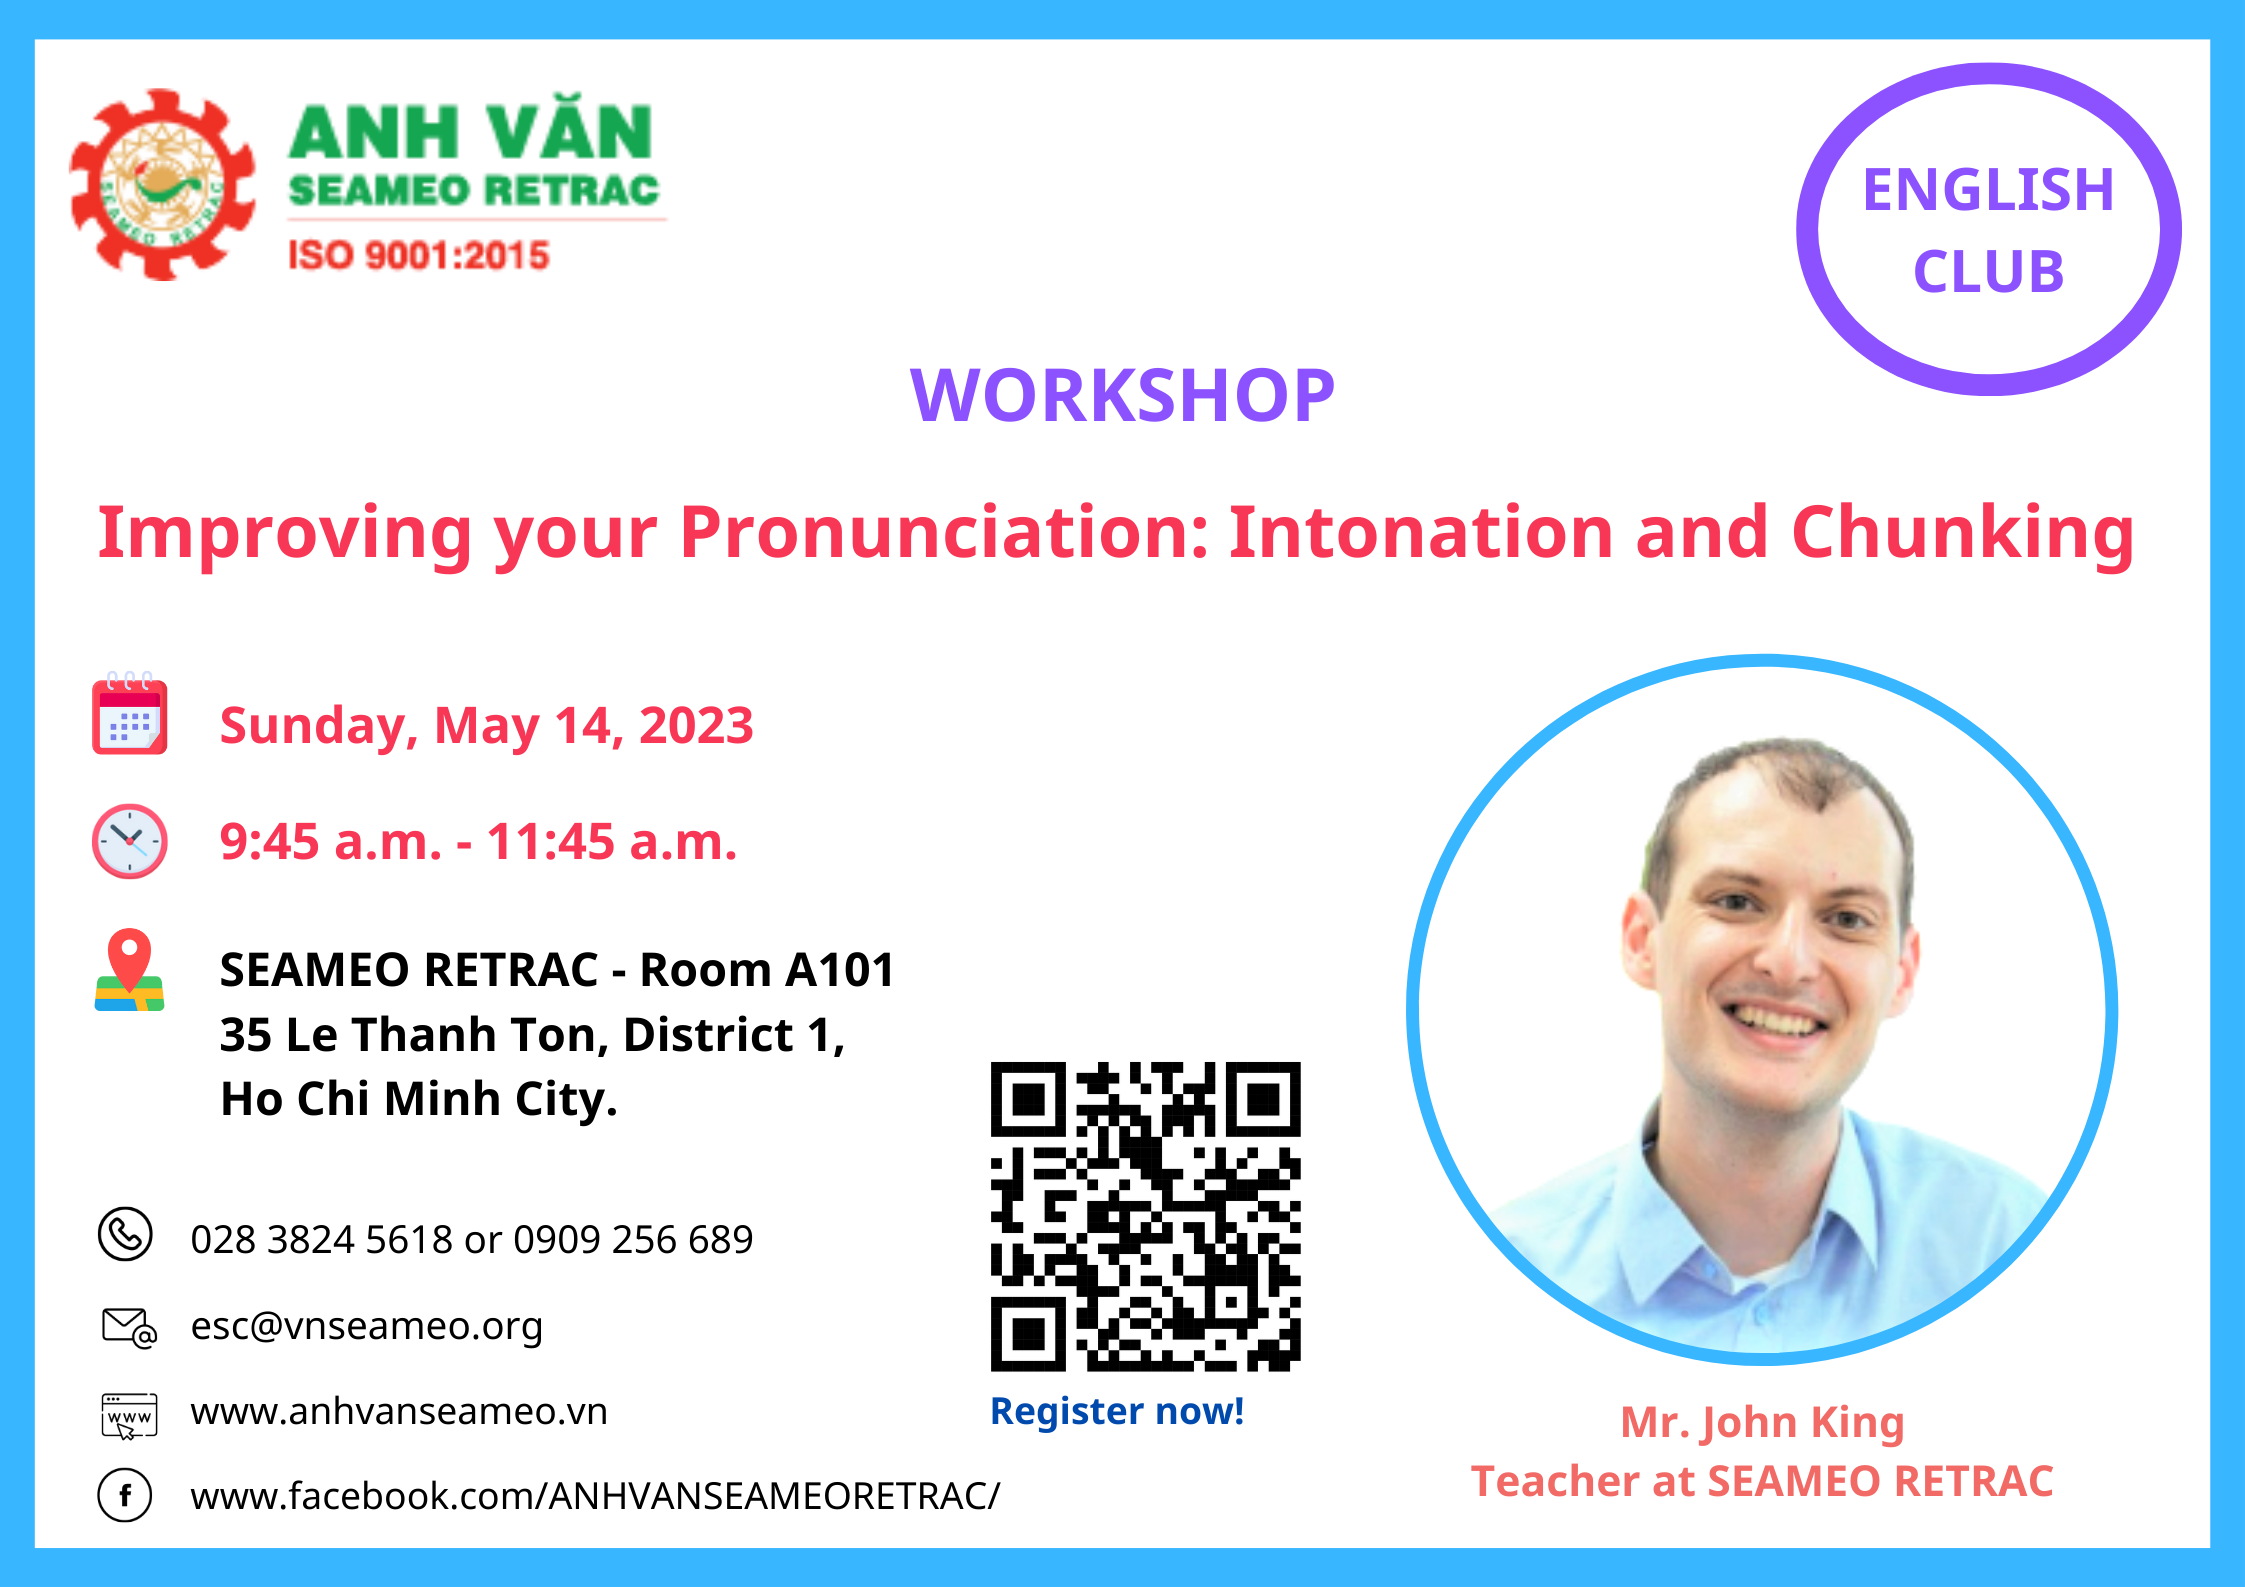 Workshop on “IMPROVING YOUR PRONUNCIATION: INTONATION AND CHUNKING”